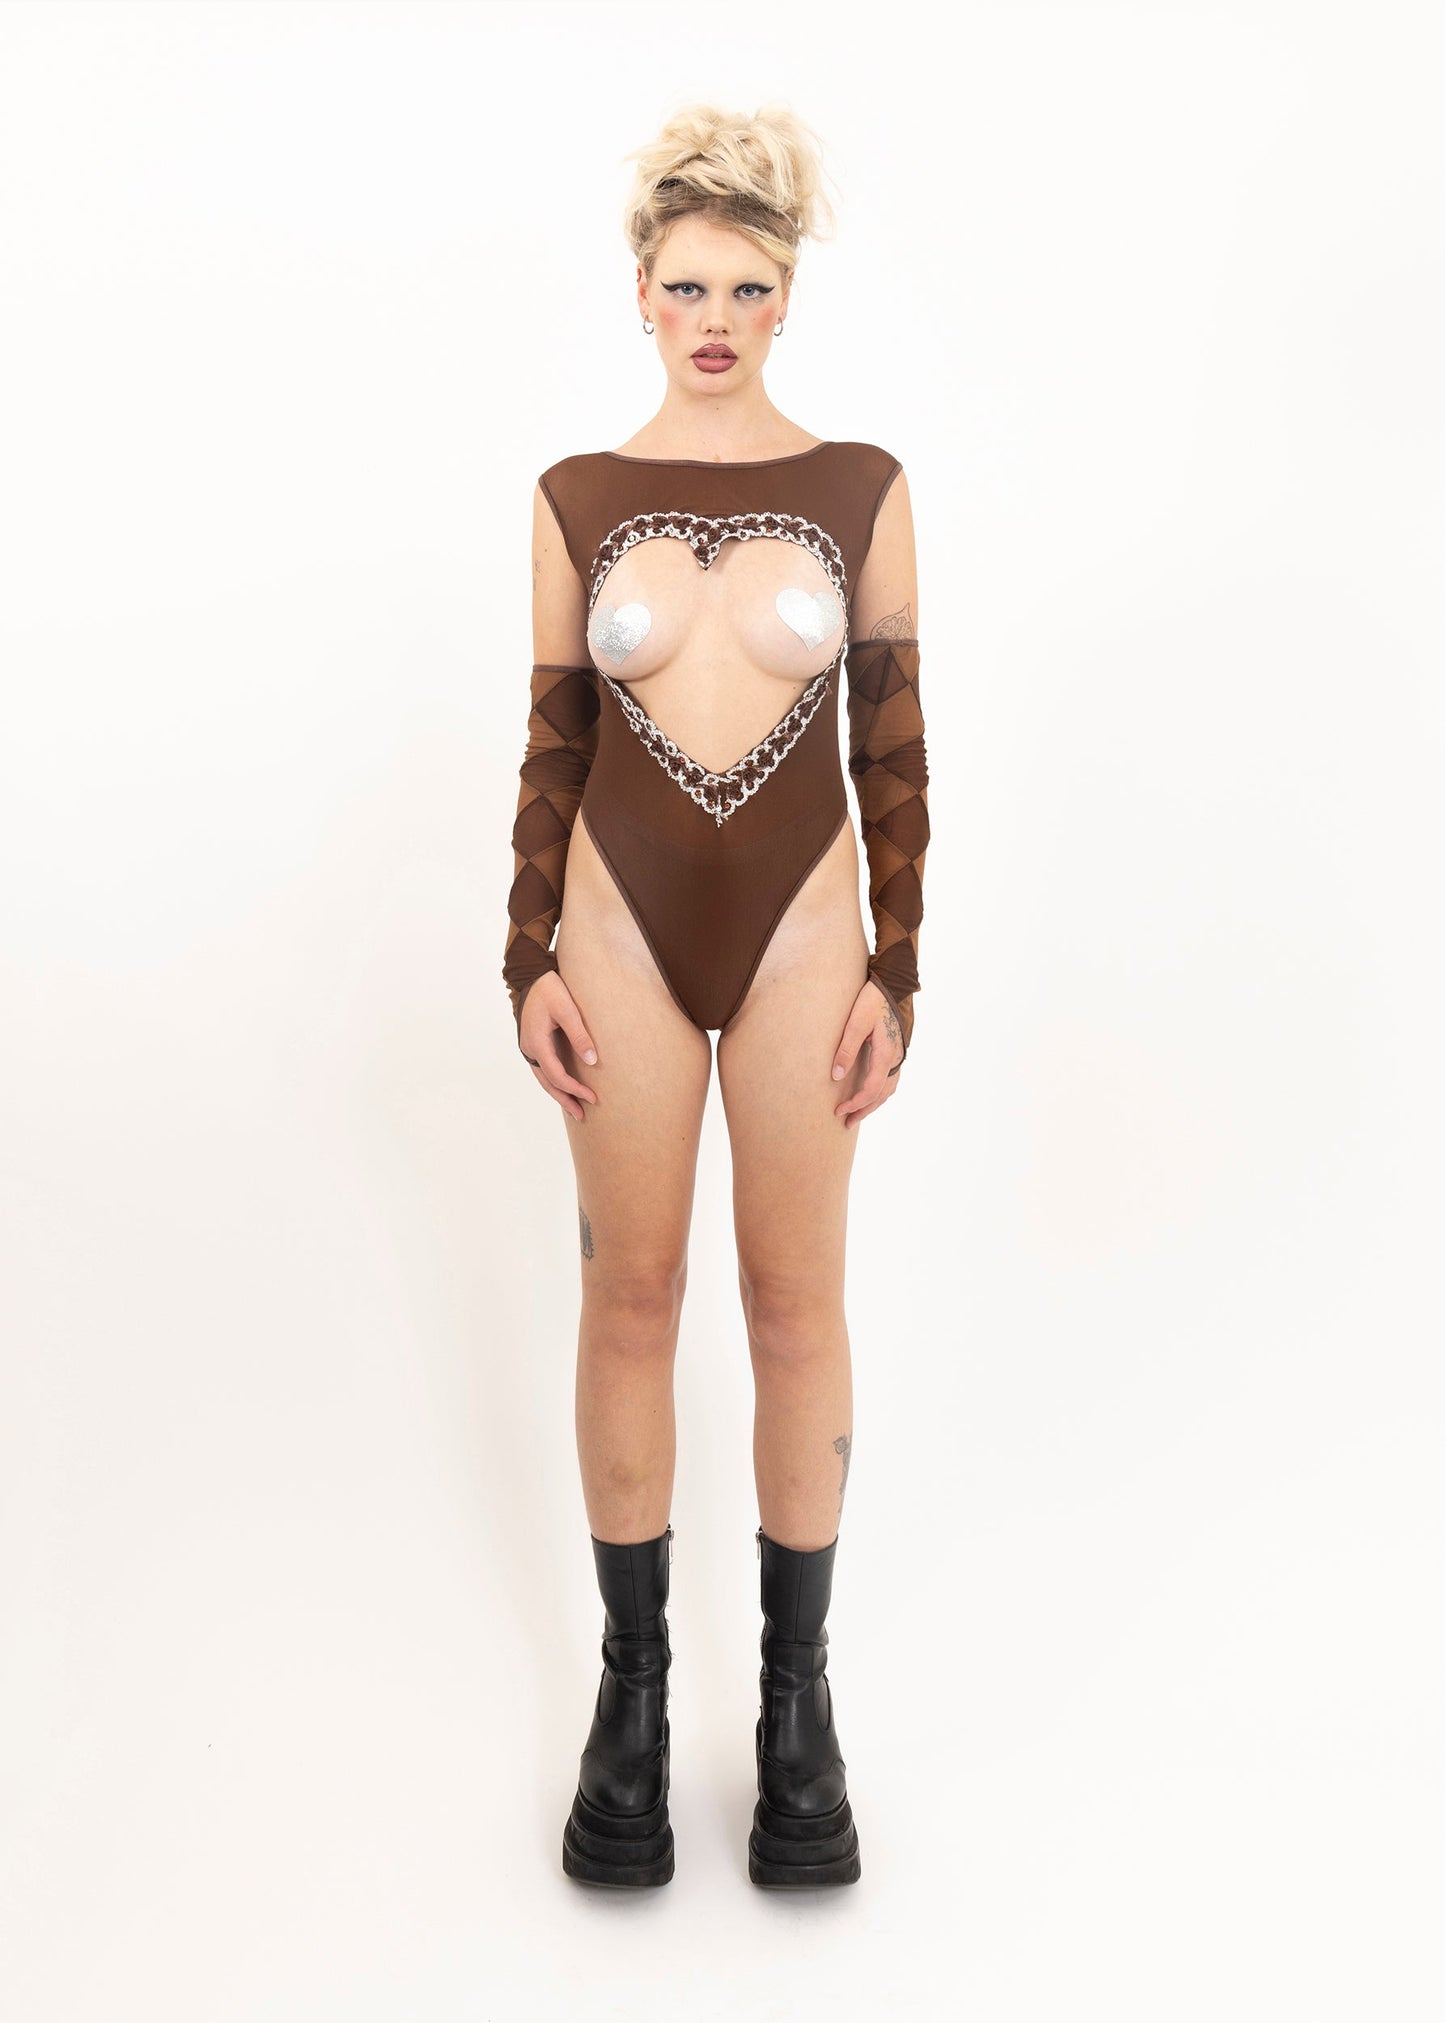 Catherine Boddy Heart cut out leotard